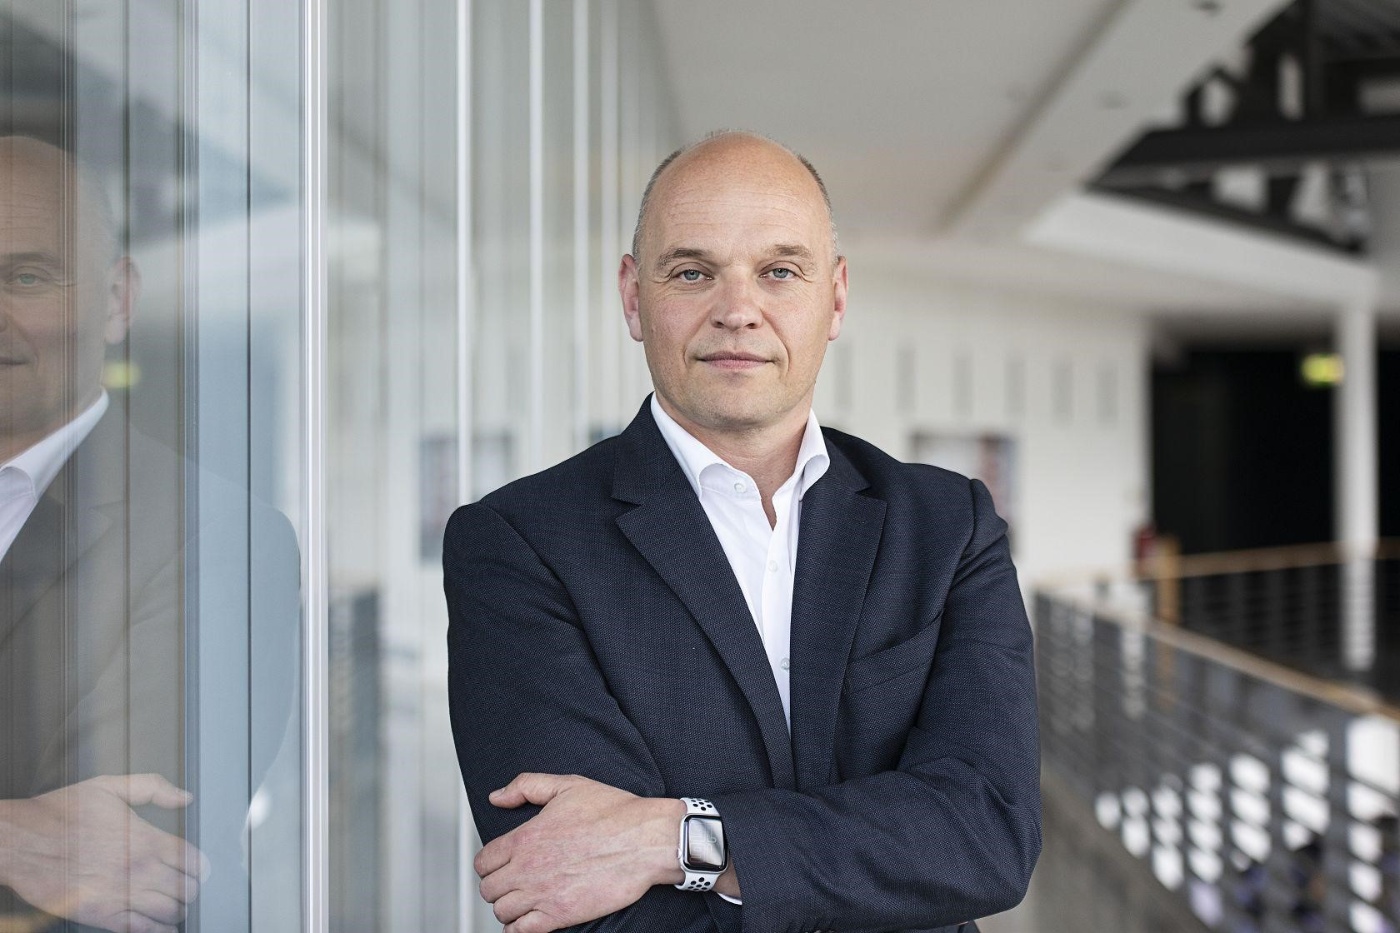 Patrick Hermanspann has been CEO of the FAUN Group since 2013. Prior to that, he held various positions in the group for over ten years. Image: ENGINIUS (FAUN Group)